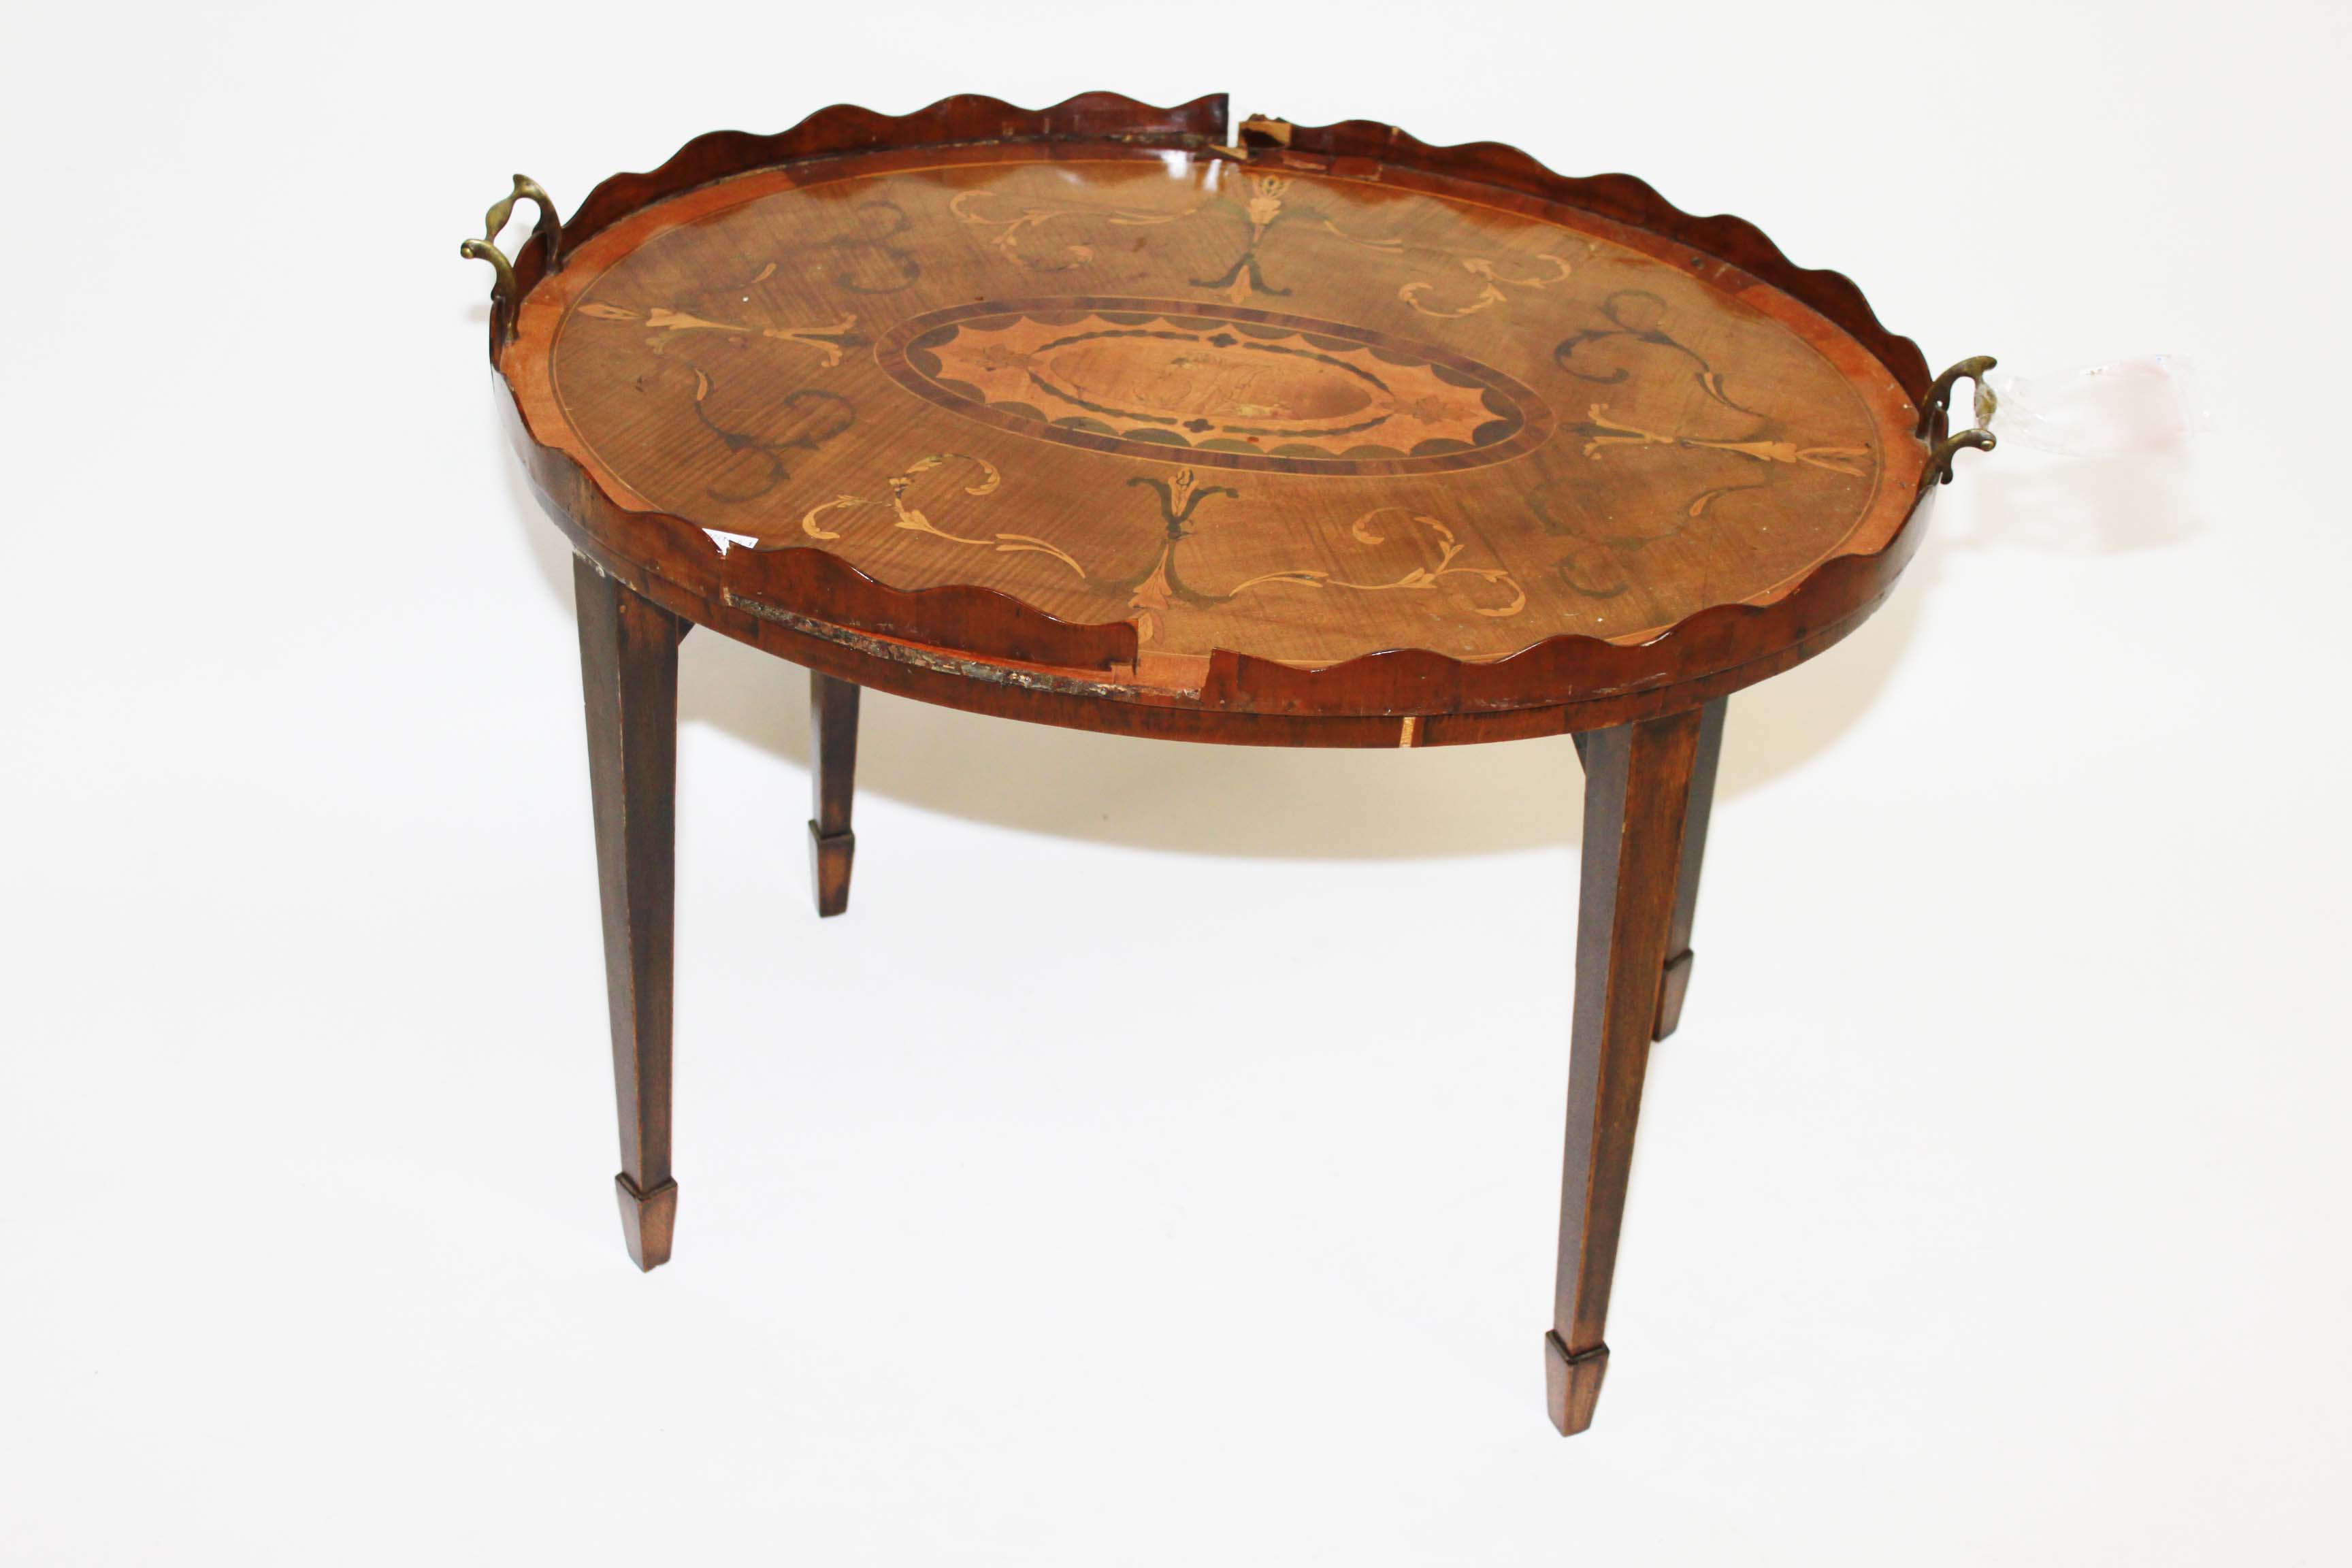 AN OVAL INLAID MAHOGANY TRAY, 
19th century, the marquetry top with a central monogram and two brass